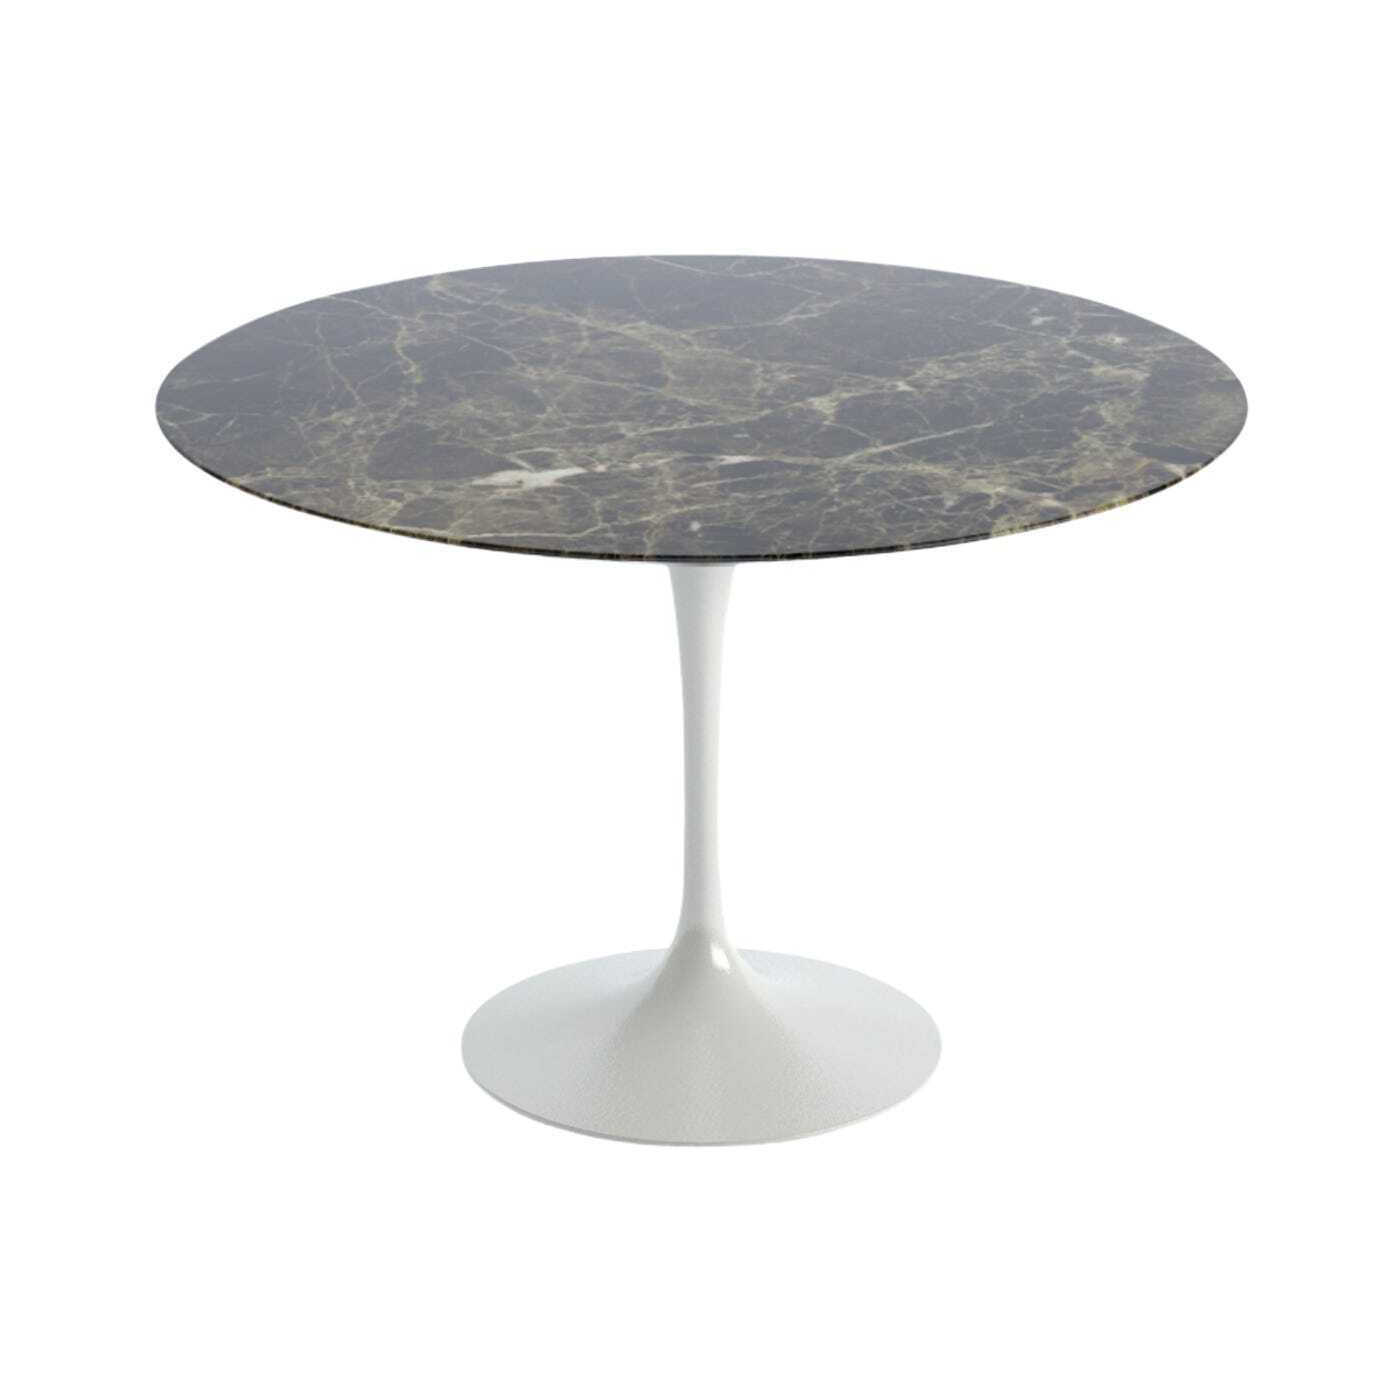 Knoll Saarinen Dining Table with White Base in Brown Emperador 107cm - image 1